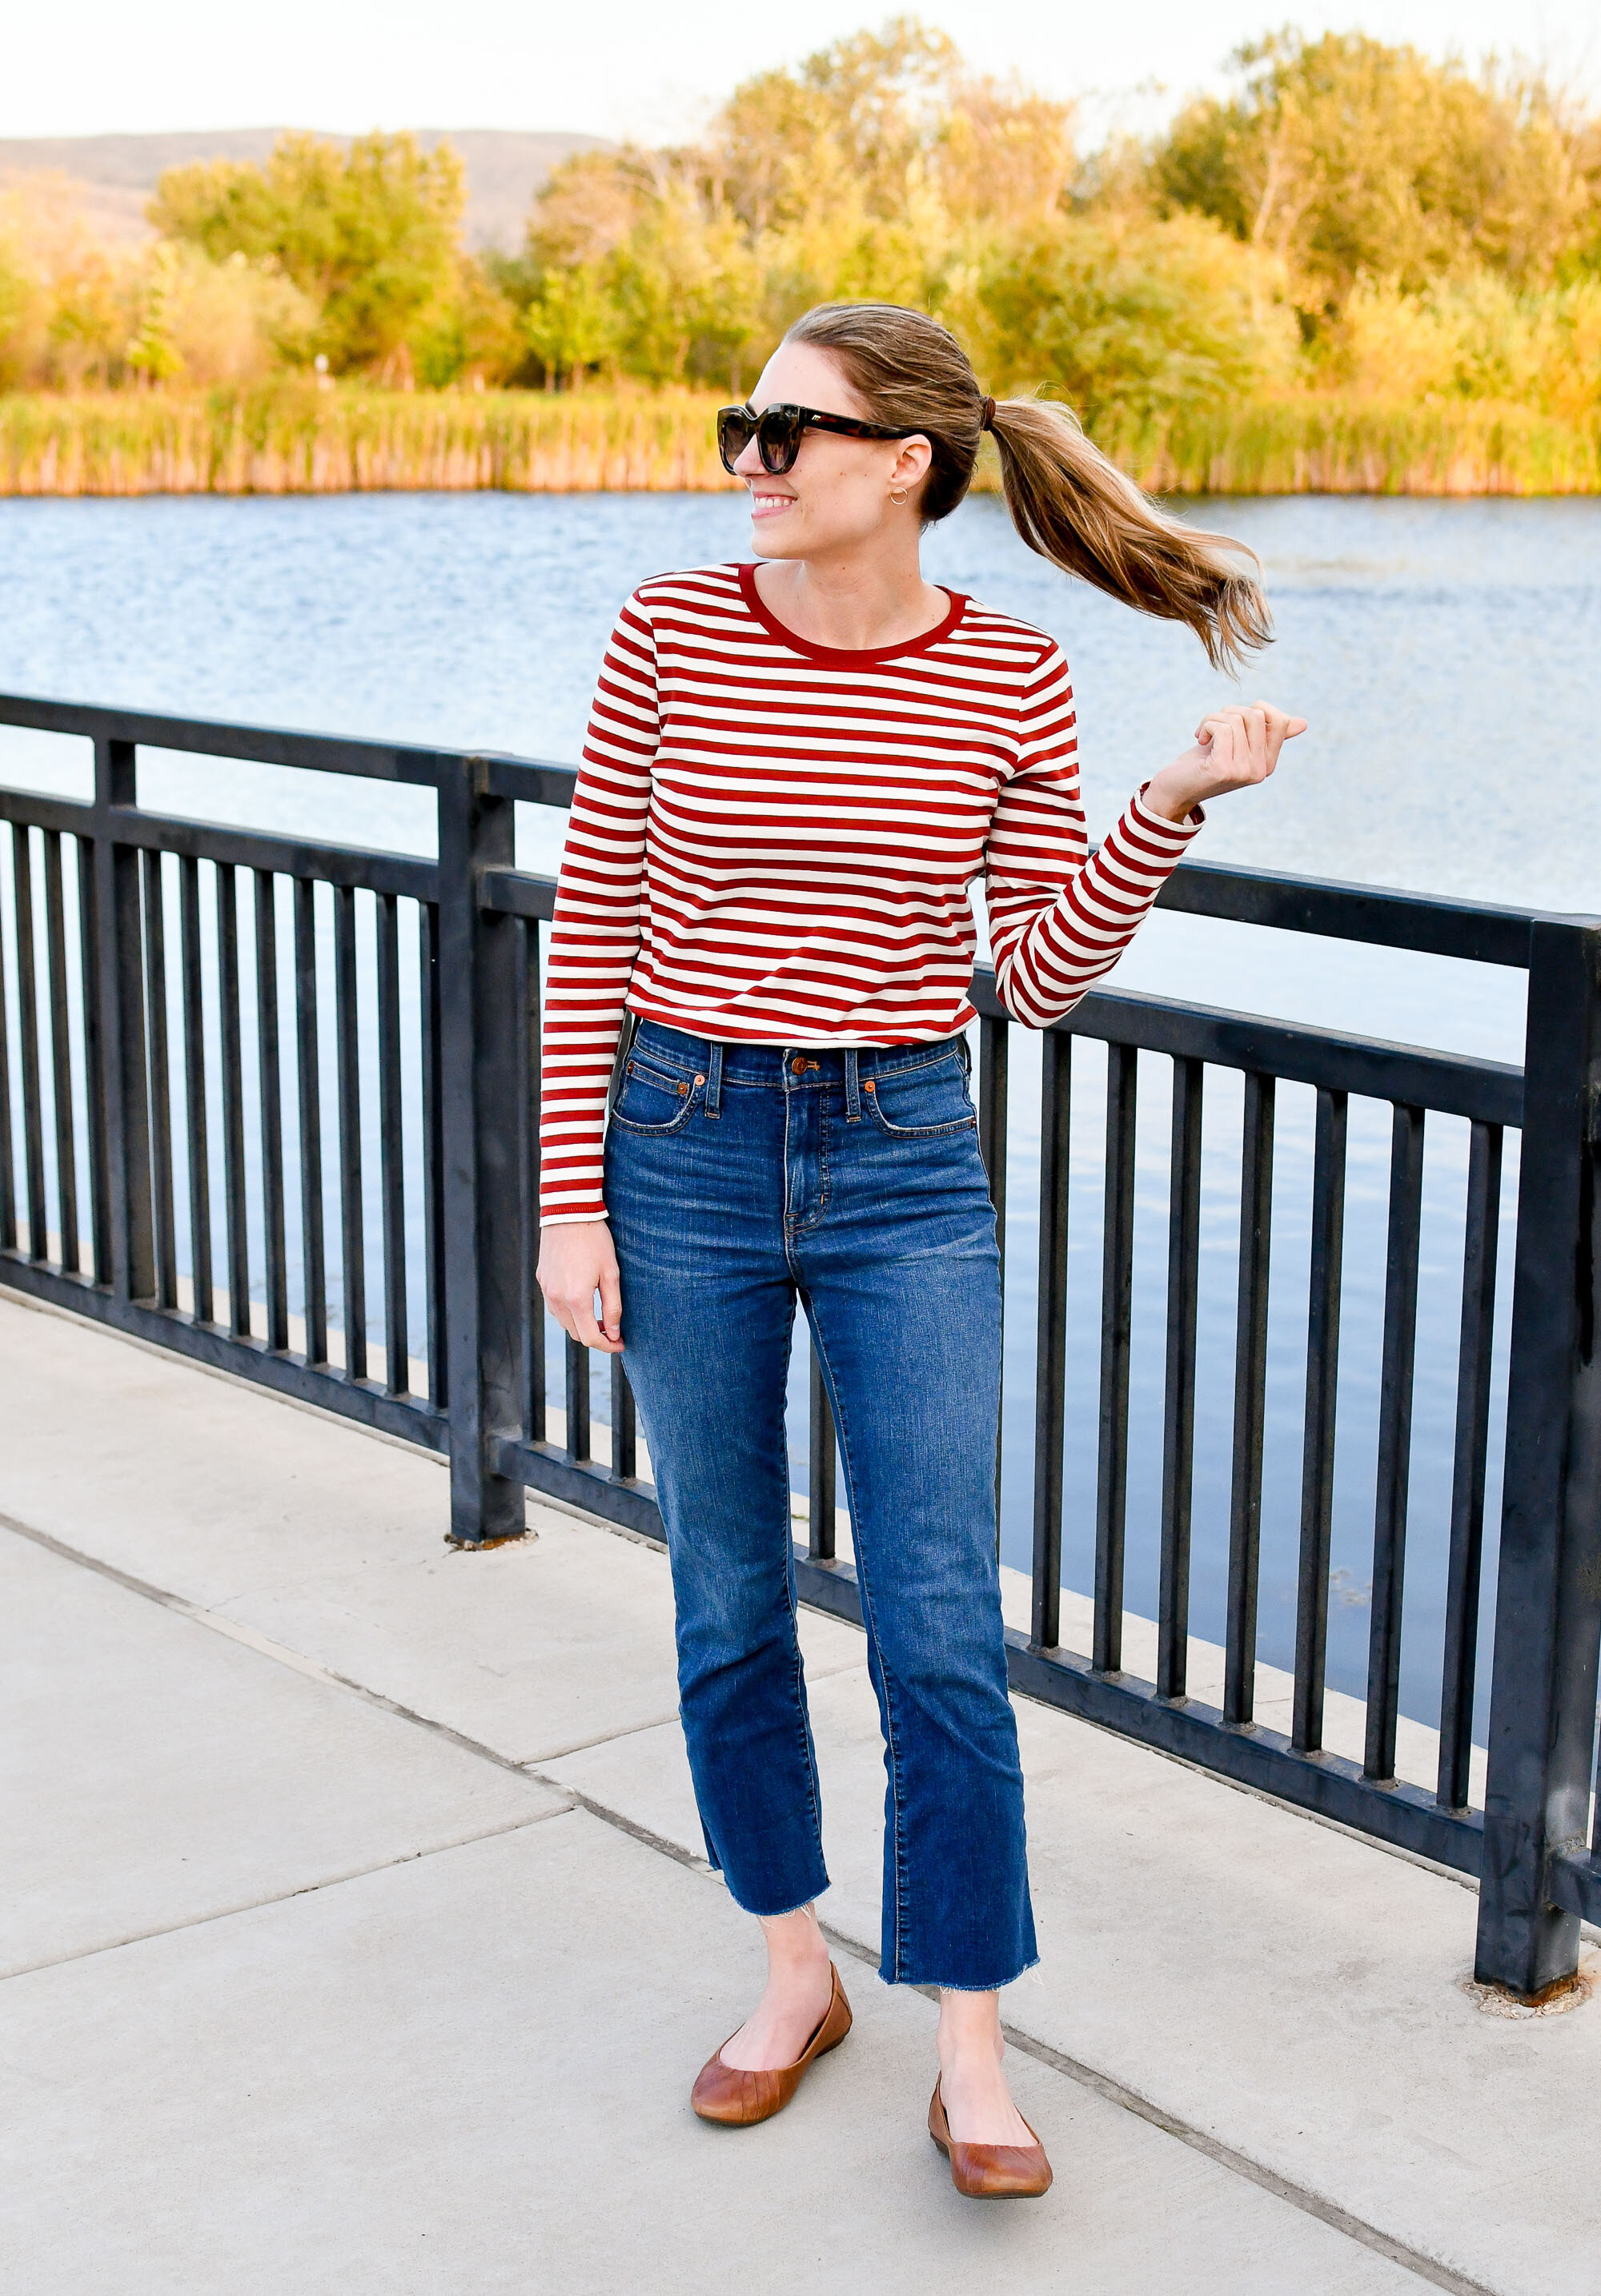 Fall outfit to wear to work from home / dark red striped tee + demi-boot jeans + brown flats — Cotton Cashmere Cat Hair